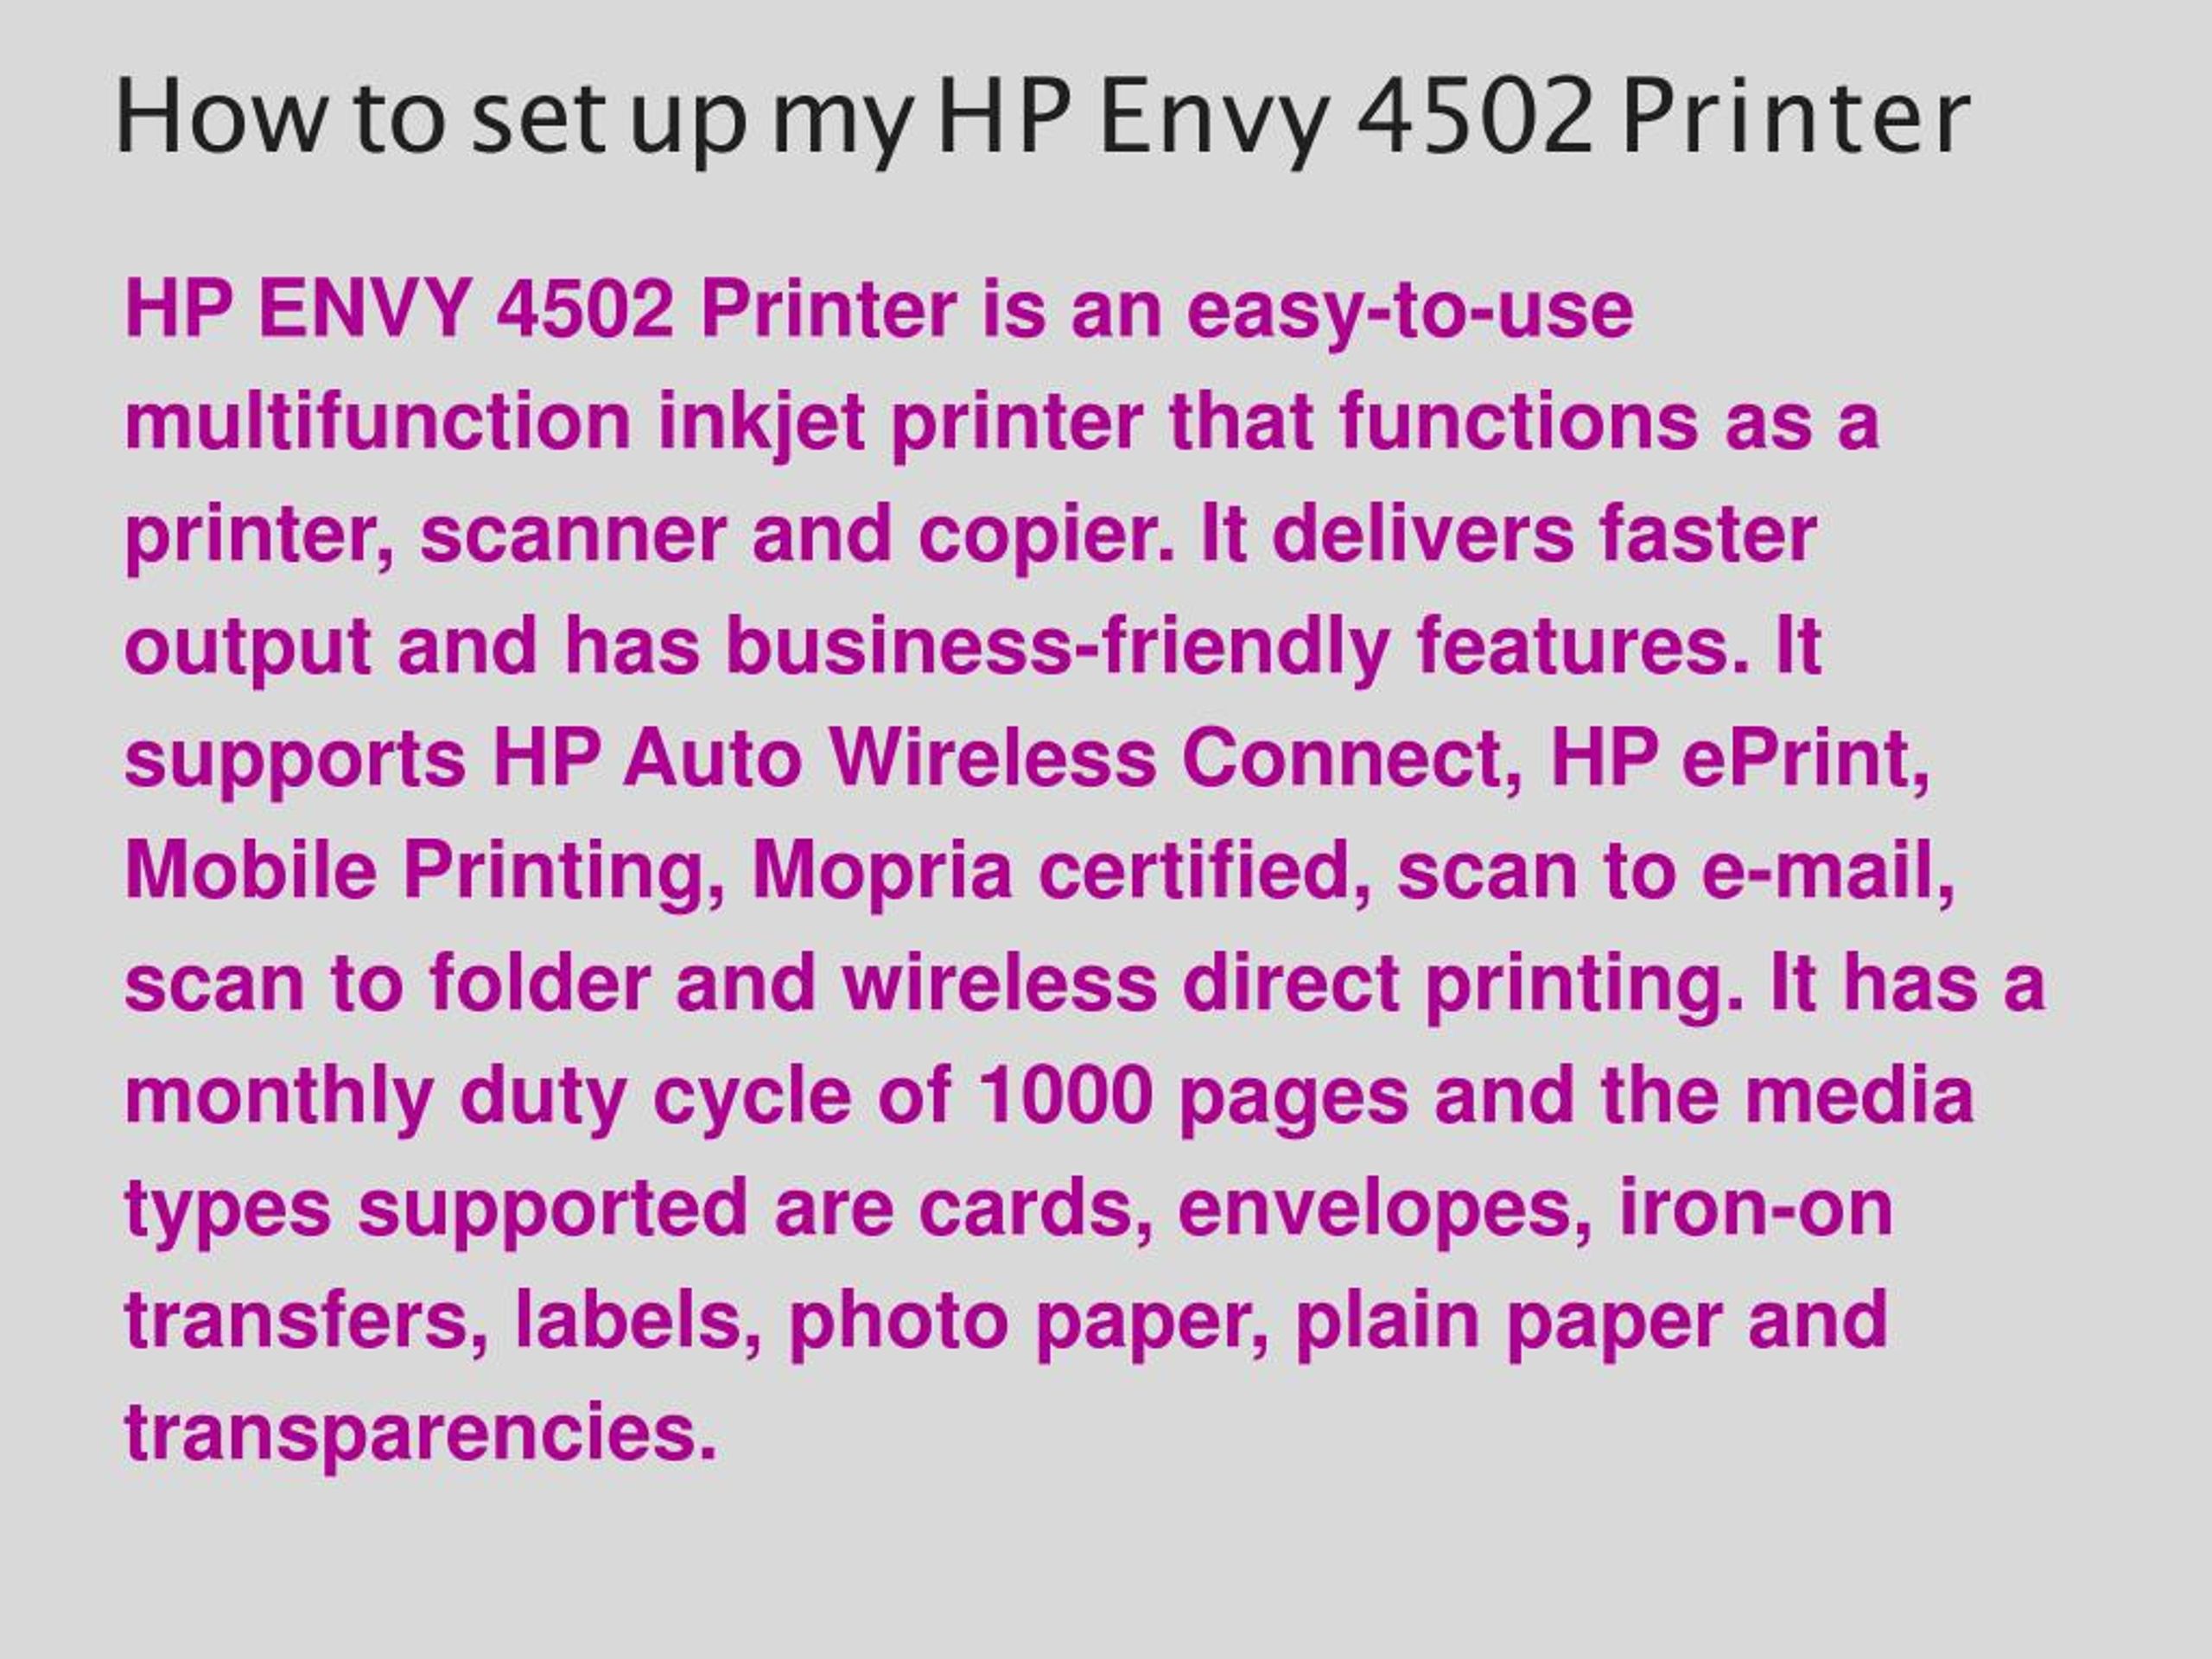 Ppt Hp Envy 4502 Printer Setup And Troubleshooting Solution Powerpoint Presentation Id7757657 8439